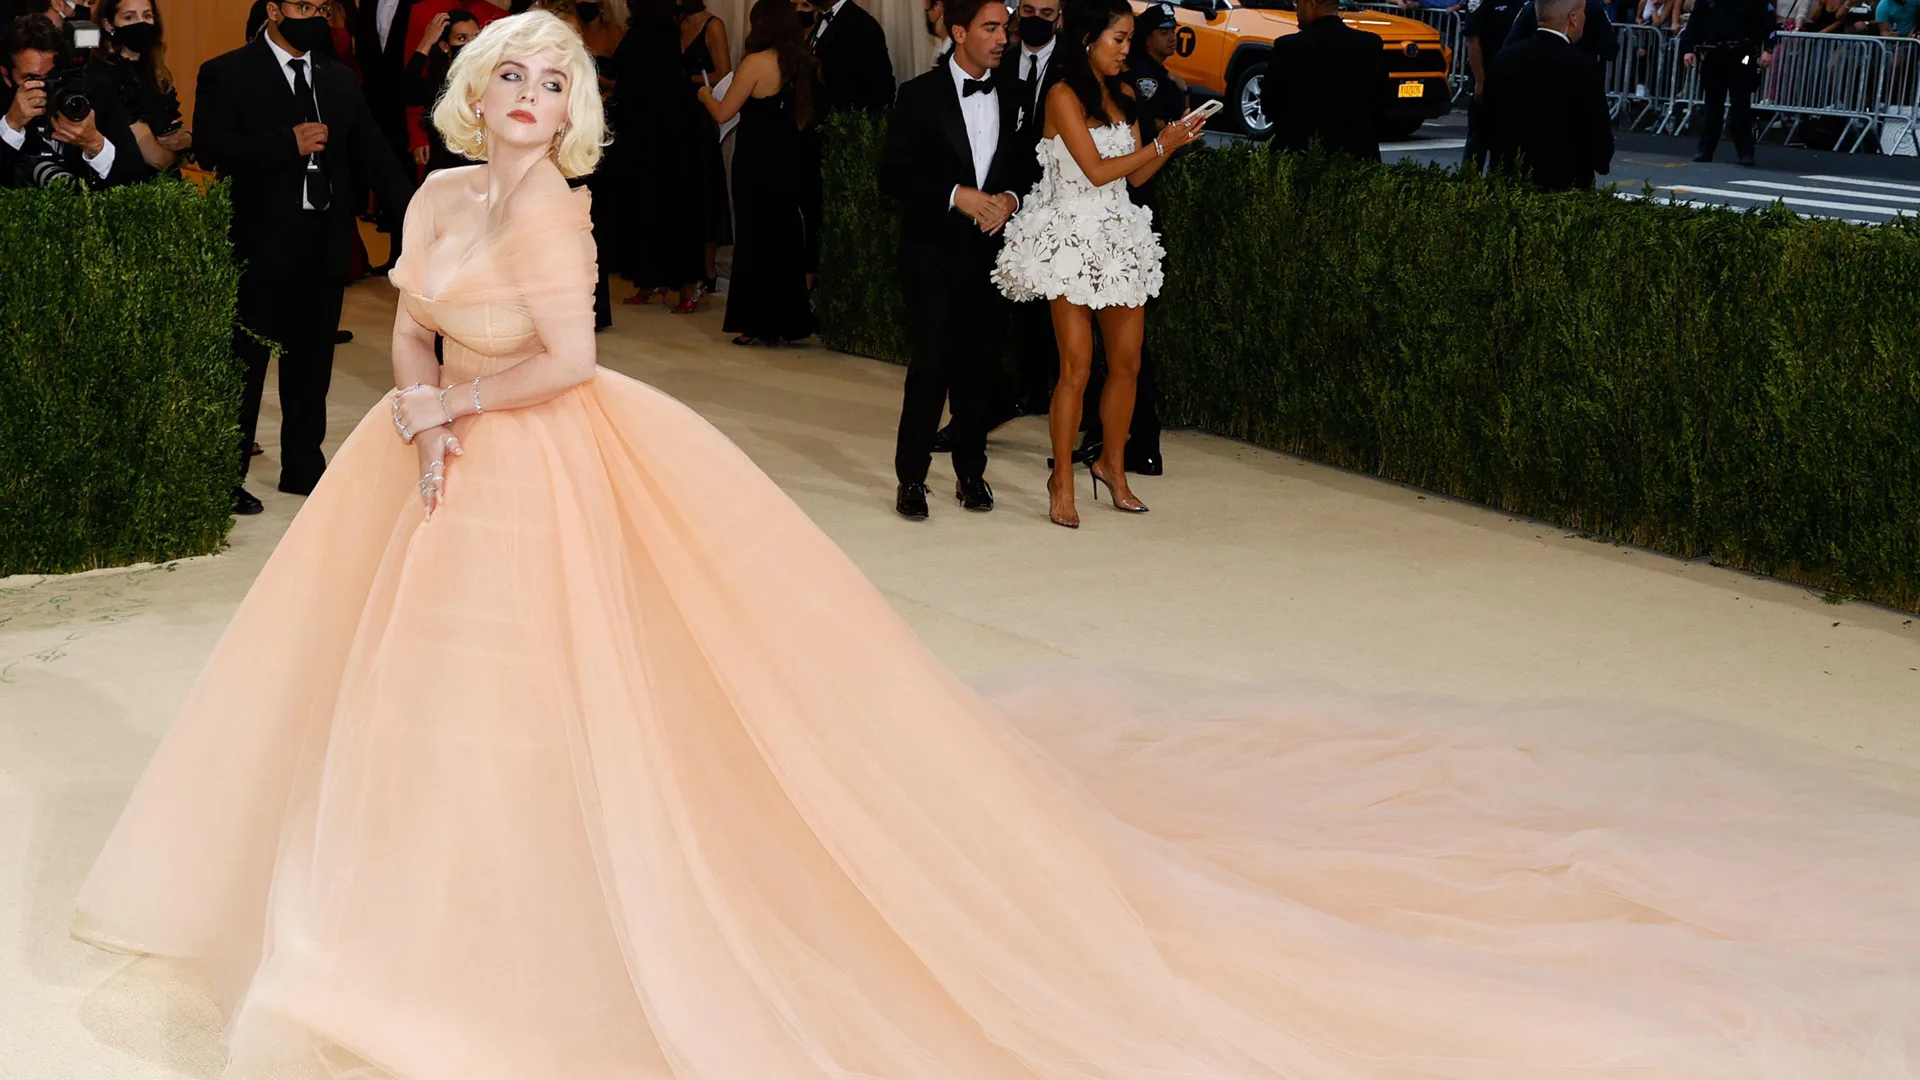 A photograph of Billie Eilish on the carpet at Met Gala wearing a peach coloured ballgown and blonde wig with people in the background on their phones